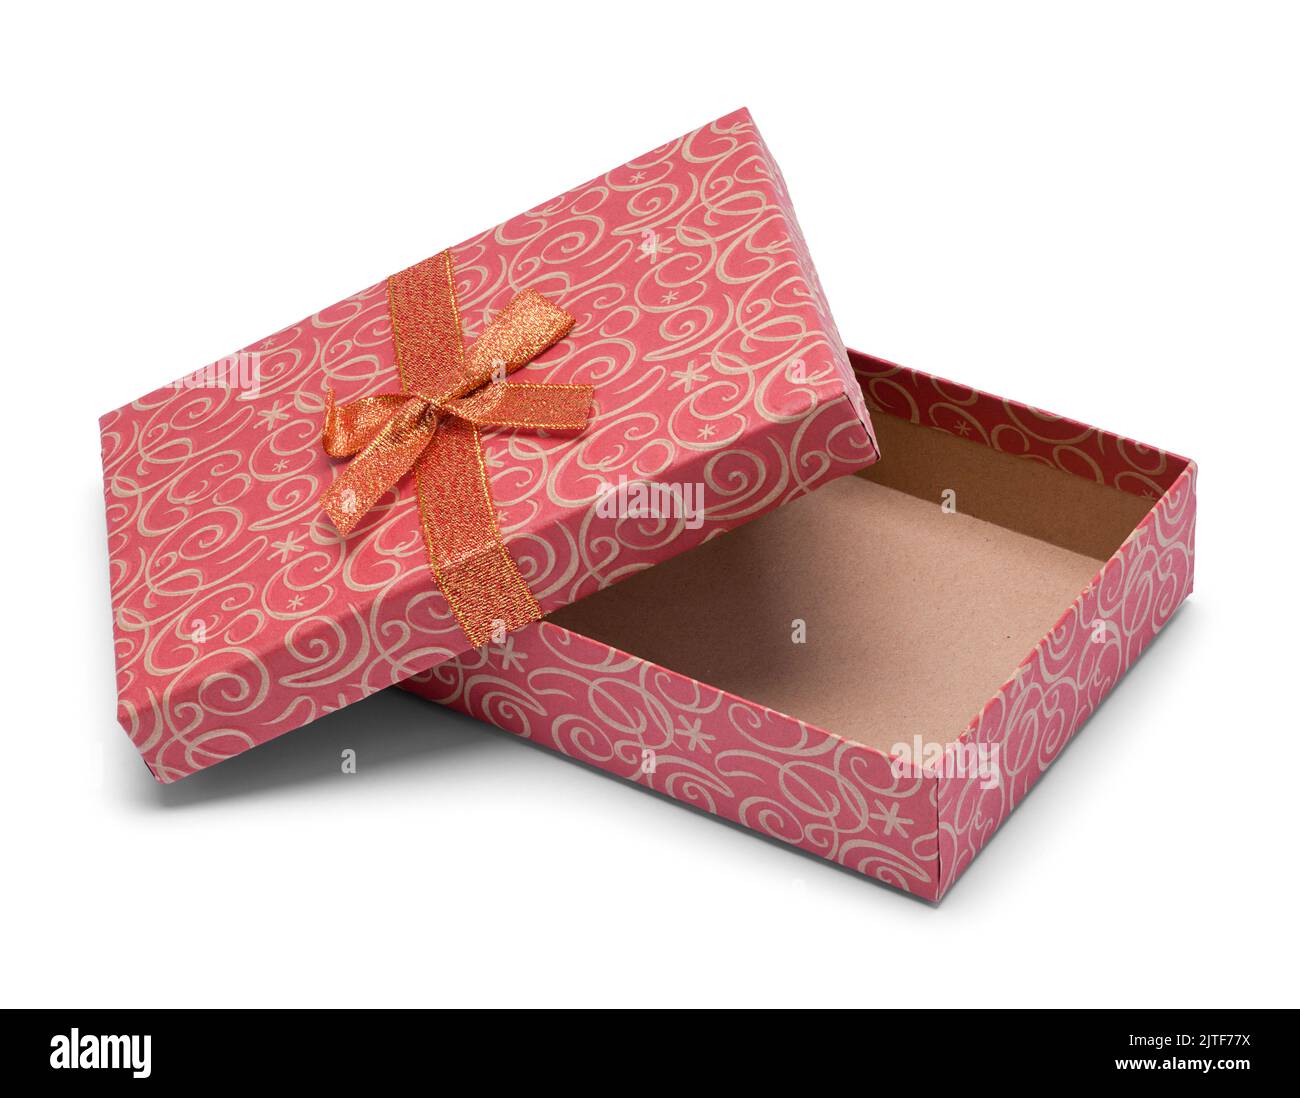 Open Flat Red Gift Box Cut Out on White. Stock Photo